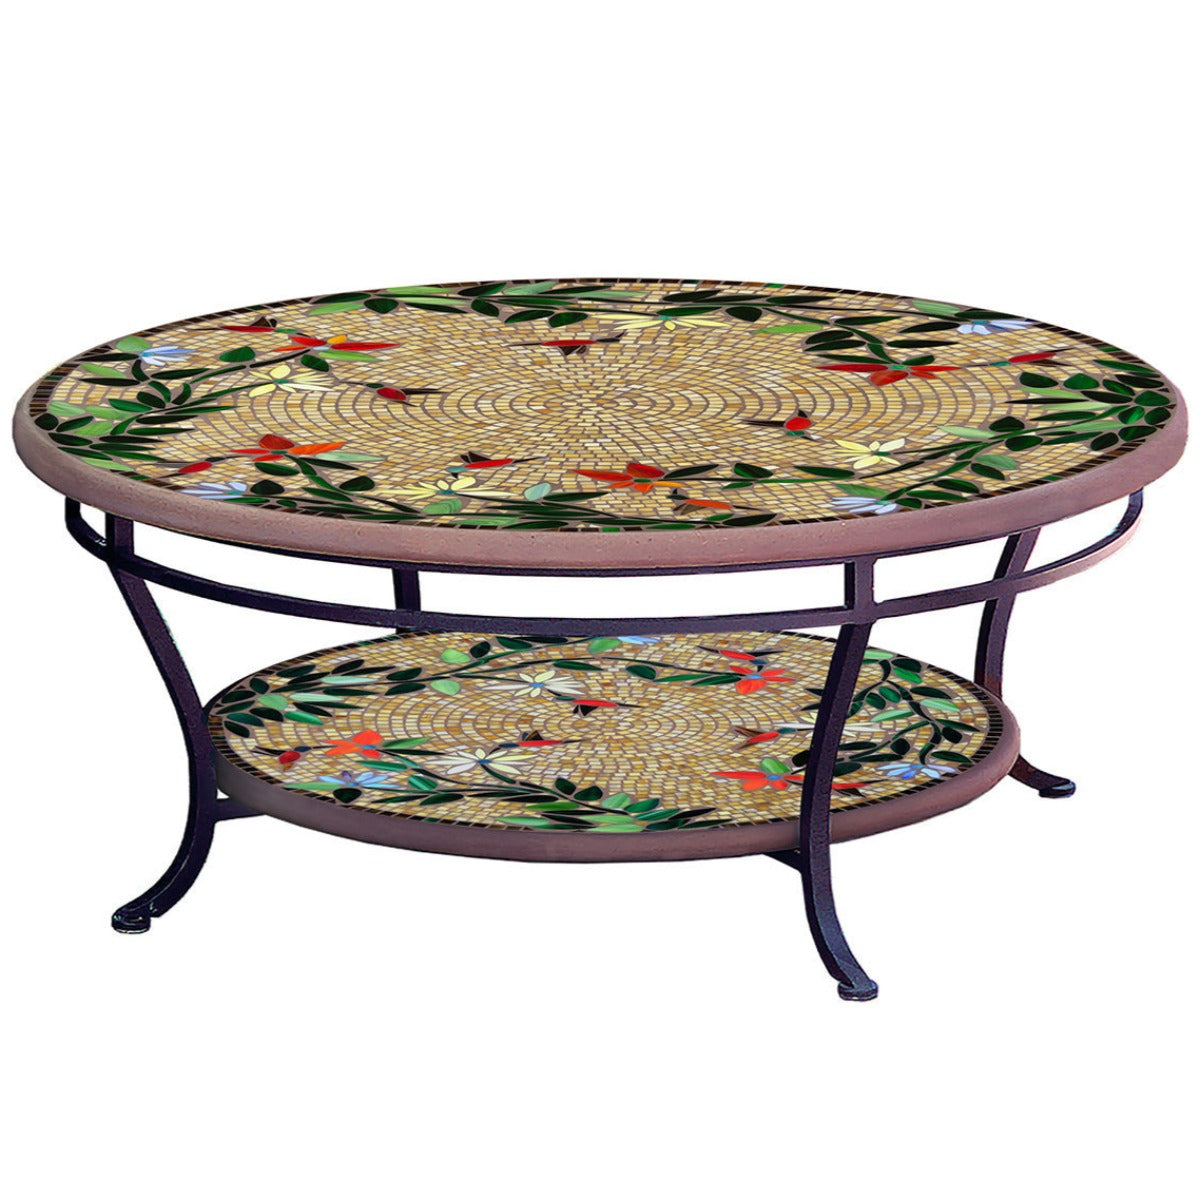 .Tiered Mosaic Coffee Tables